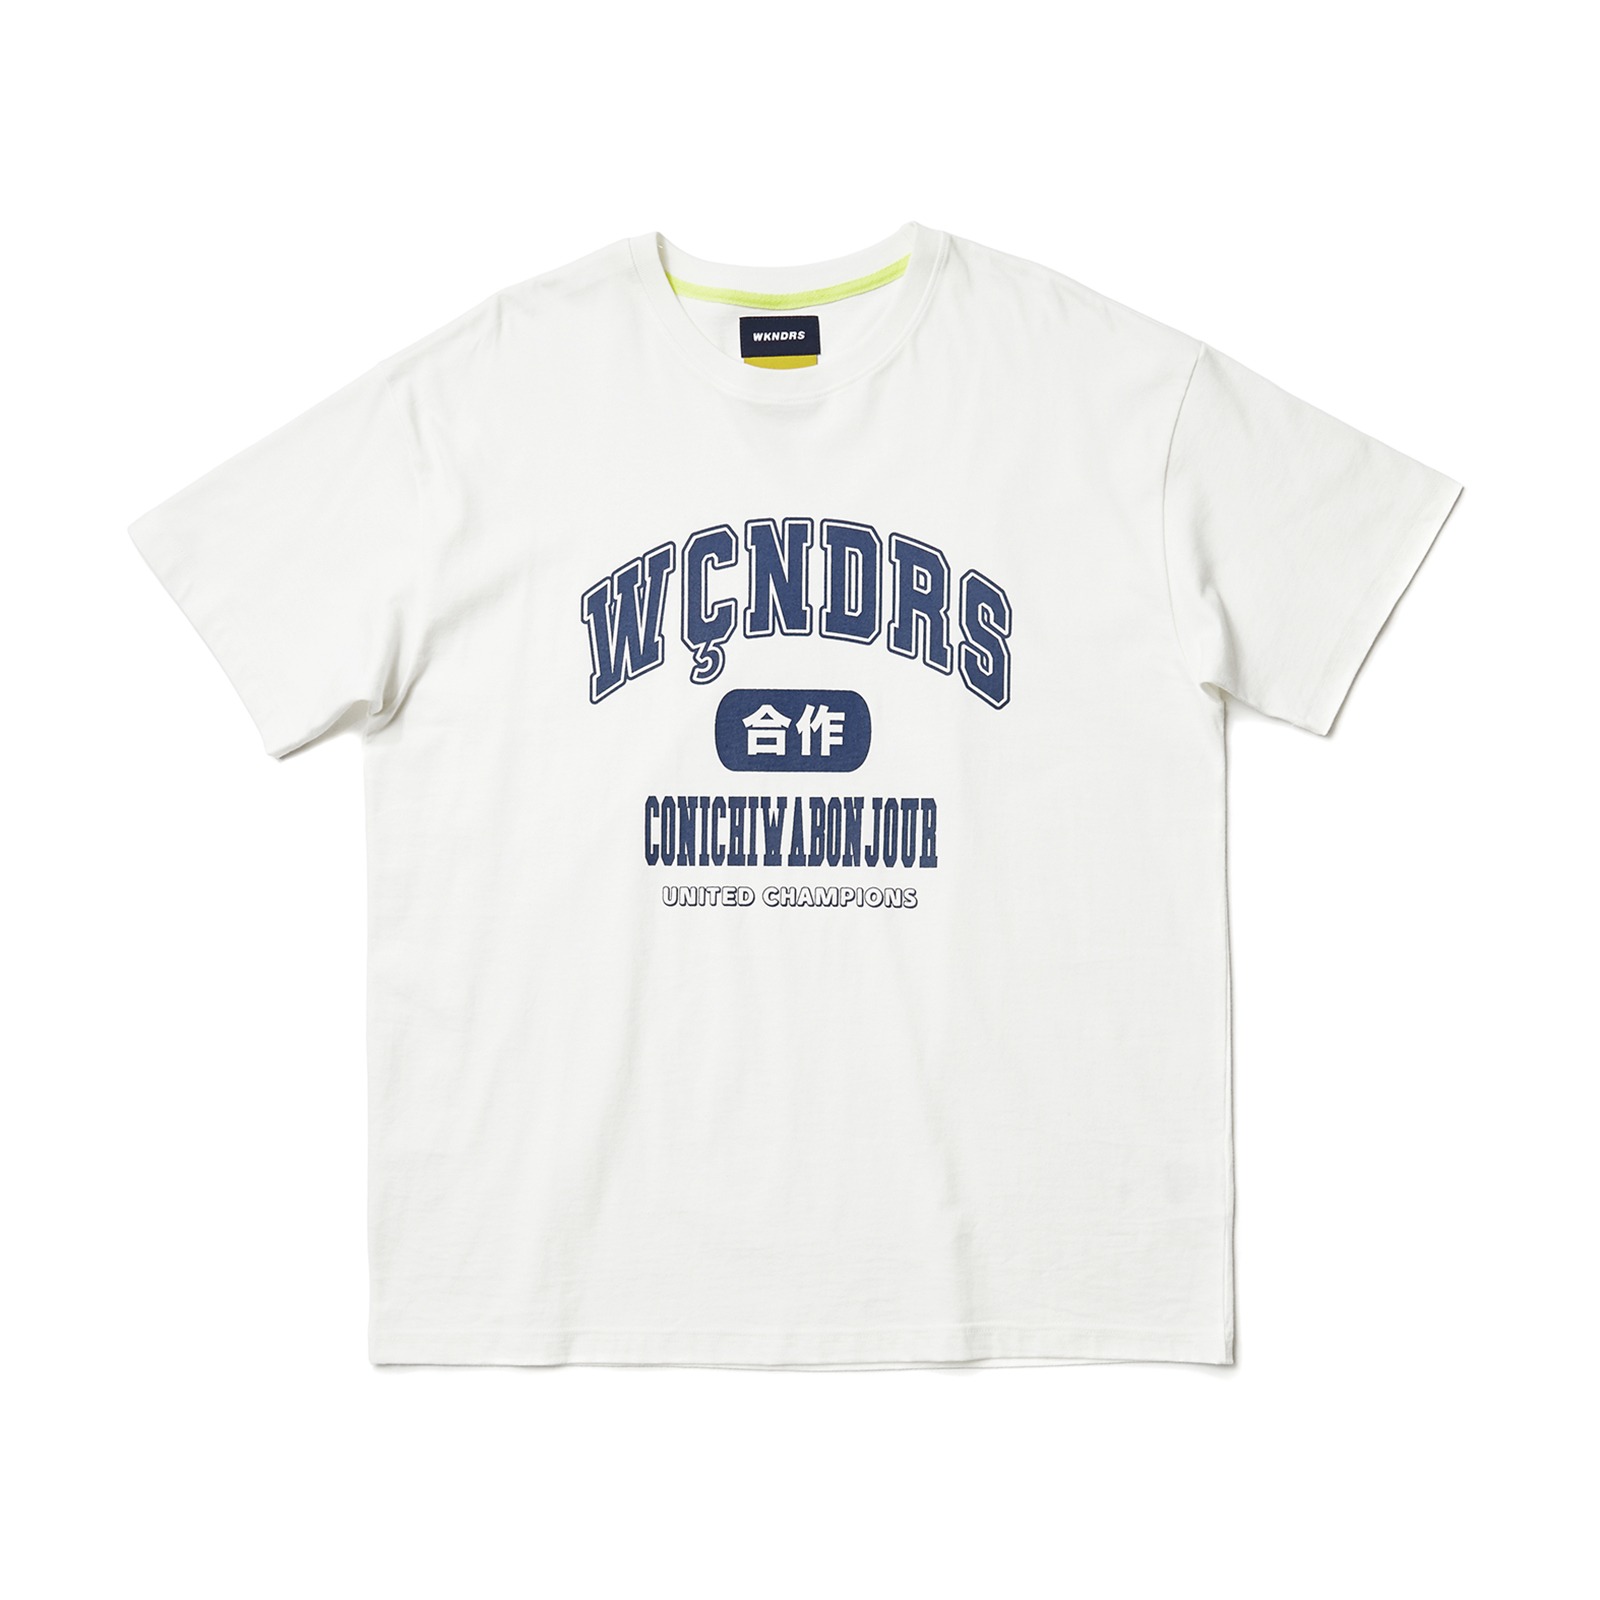 COLLEGE SS T-SHIRT (WHITE)